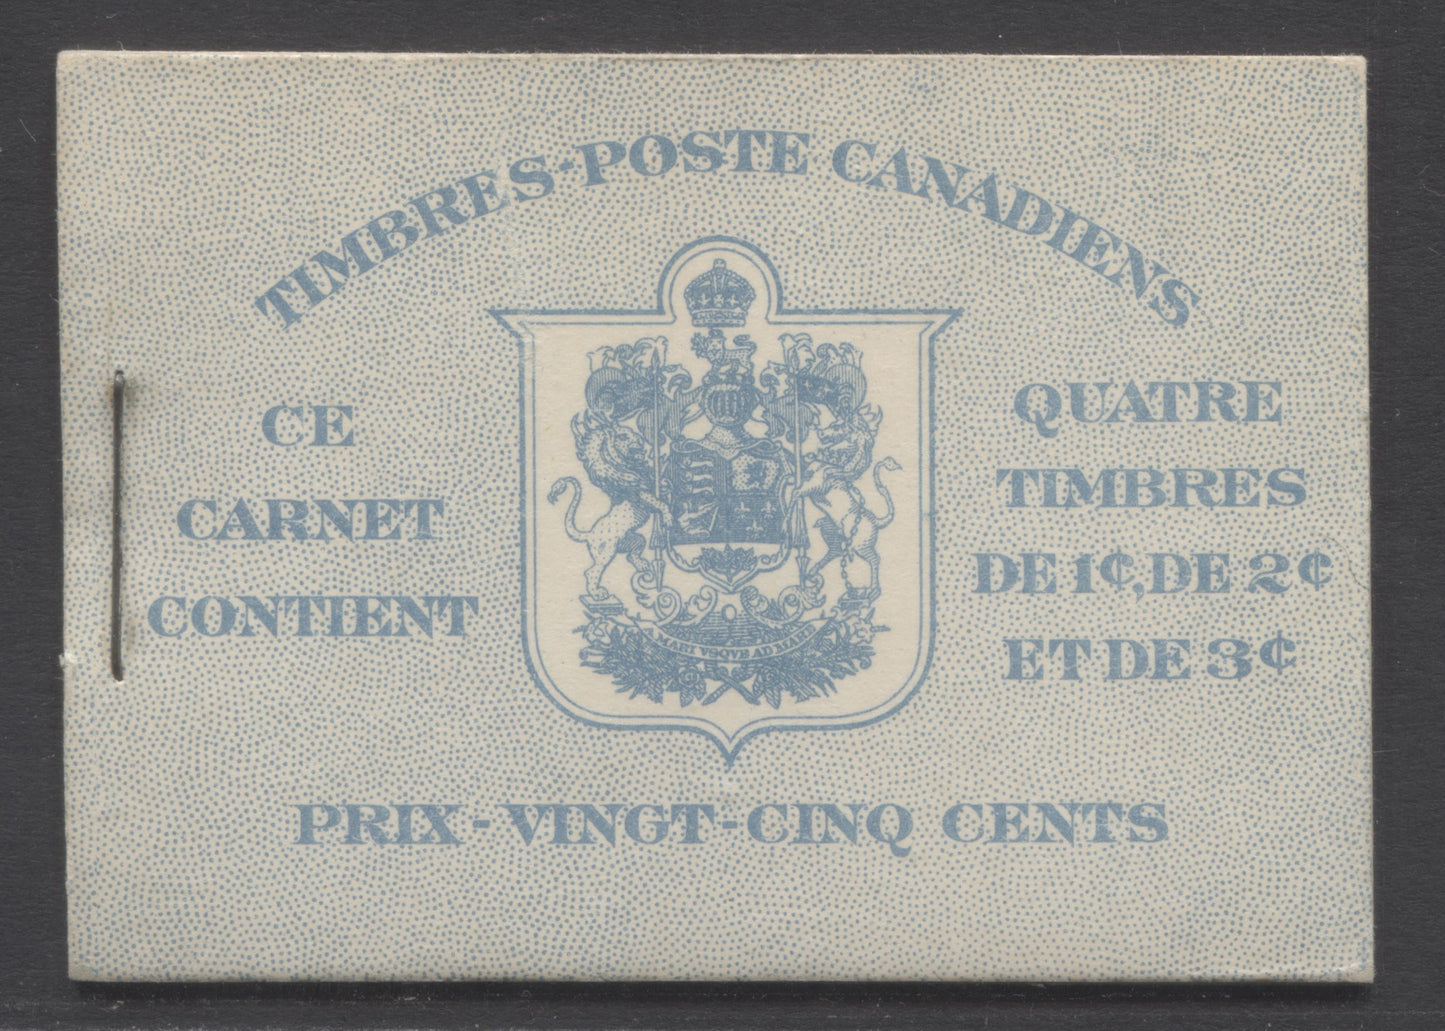 Lot 84 Canada #BK31dF 1937-1942 Mufti Issue, A Complete 25c French Booklet, No Rate Page,  Panes Of 4 Of 1c Green, 2c Brown & 3c Dark Carmine, Horizontal Ribbed Paper, Yellowish Gum, Front Cover IIp, Back Cover B, VF, Turquoise Covers